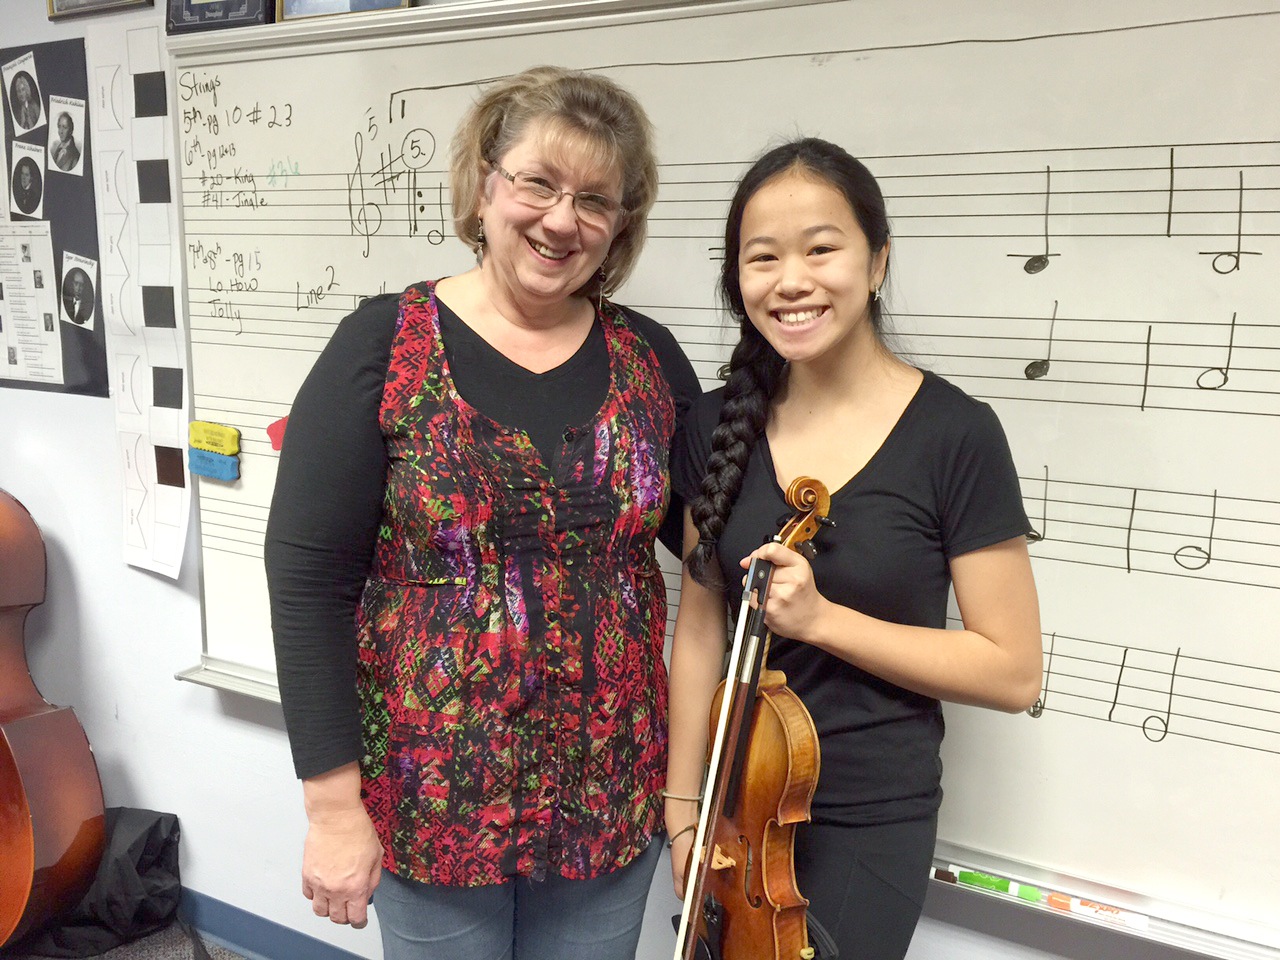 OIHS student to perform at Carnegie Hall and Sydney Opera House